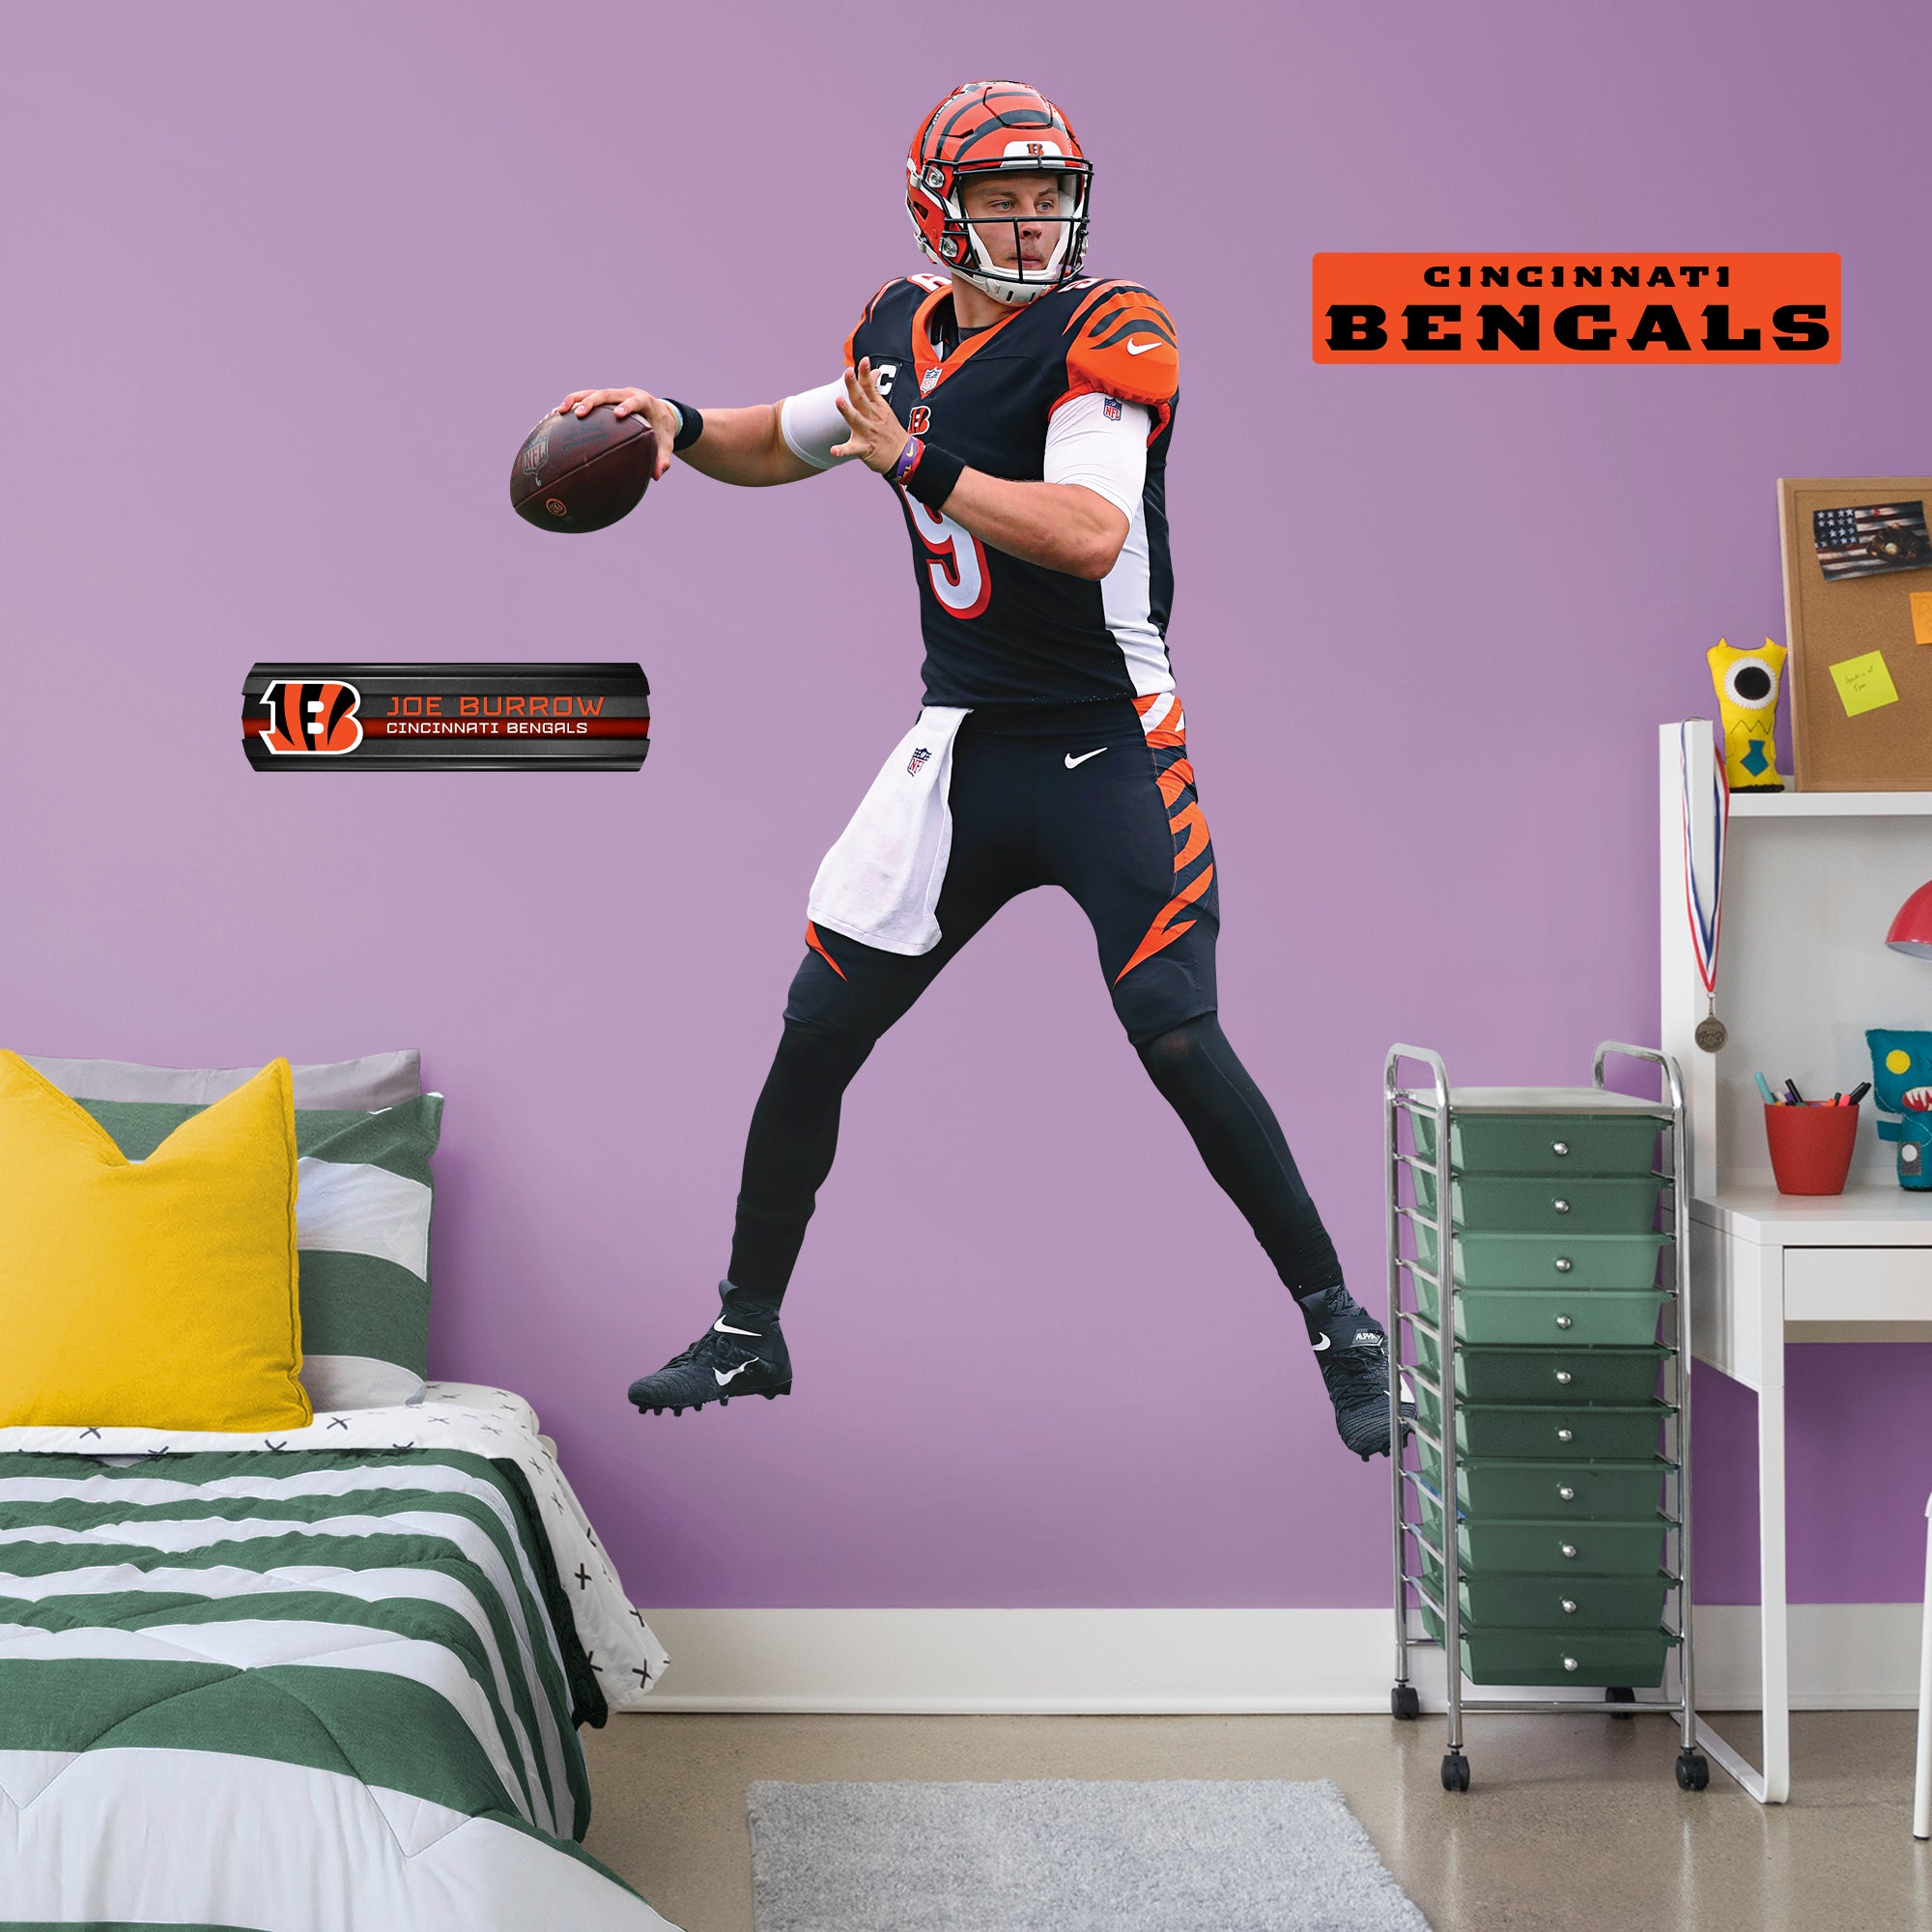 Joe Burrow: RealBig Officially Licensed NFL Removable Wall Decal Life-Size Athlete + 2 Decals by Fathead | Vinyl